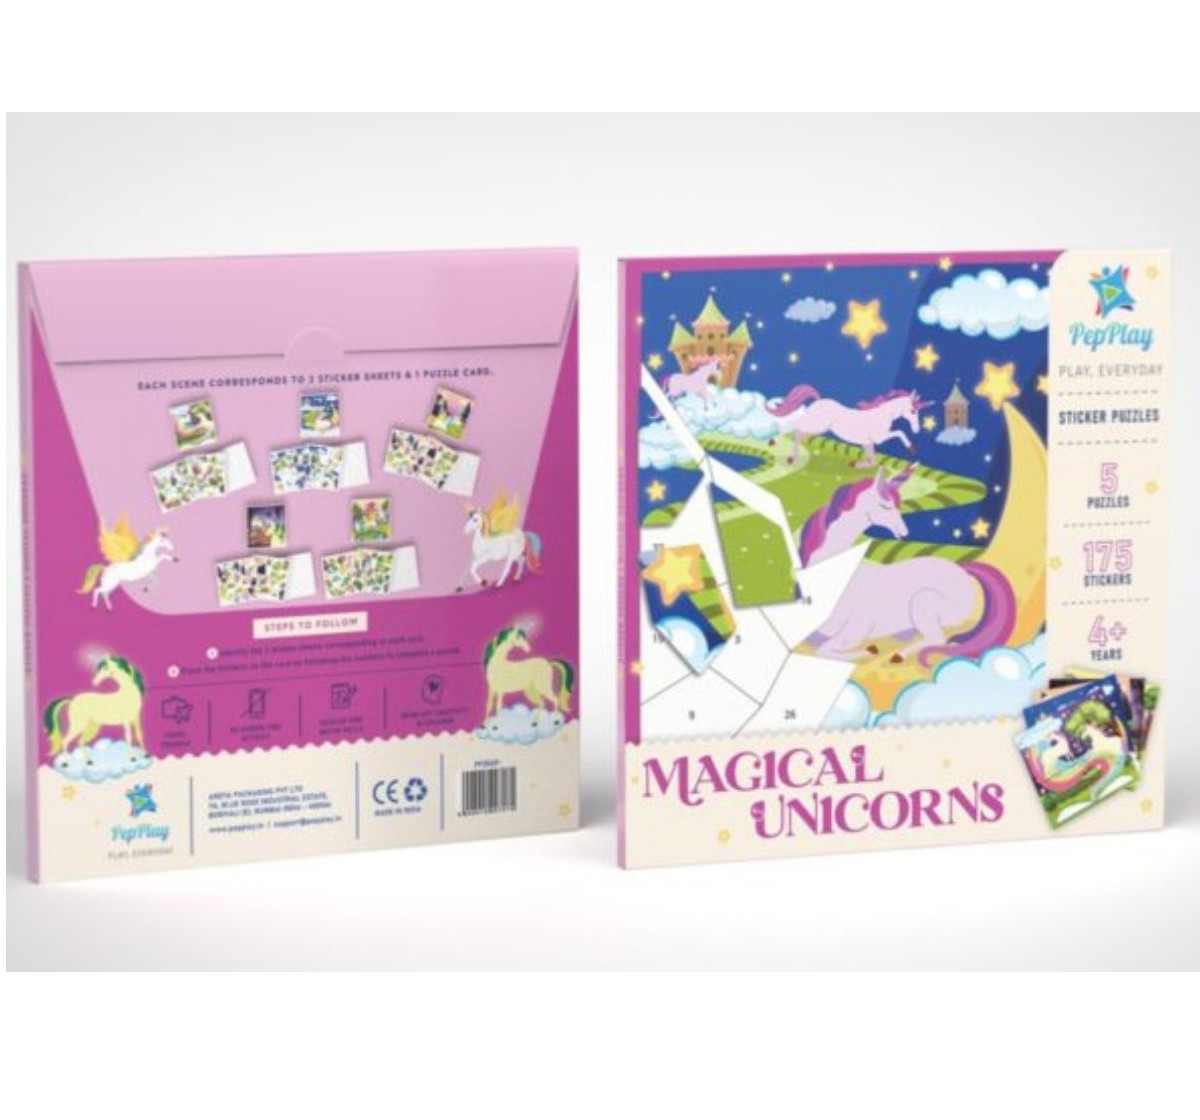 PepPlay Magical Unicorn Sticker Puzzle with Set of 5 Jigsaw Puzzles children 4 Years Old and Above (23 x 23 cm)